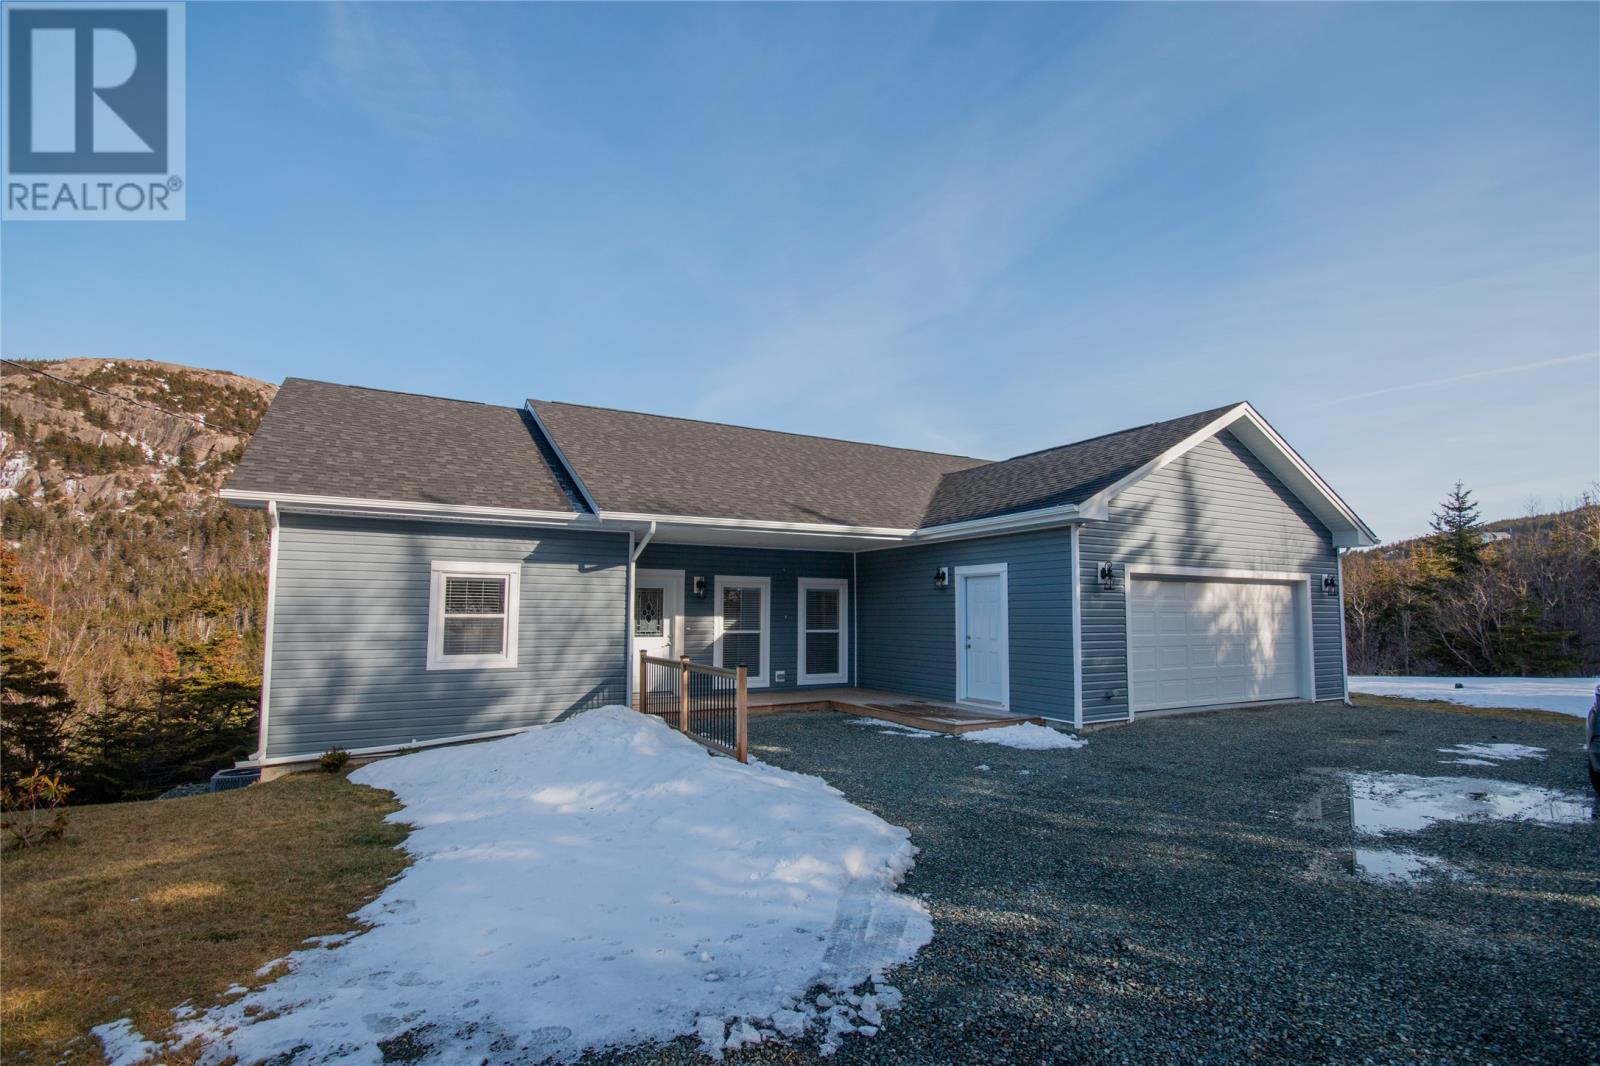 285 Beachy Cove Road, Portugal Cove-St. Philips, A1M1Z4, 3 Bedrooms Bedrooms, ,2 BathroomsBathrooms,Single Family,For sale,Beachy Cove,1269164